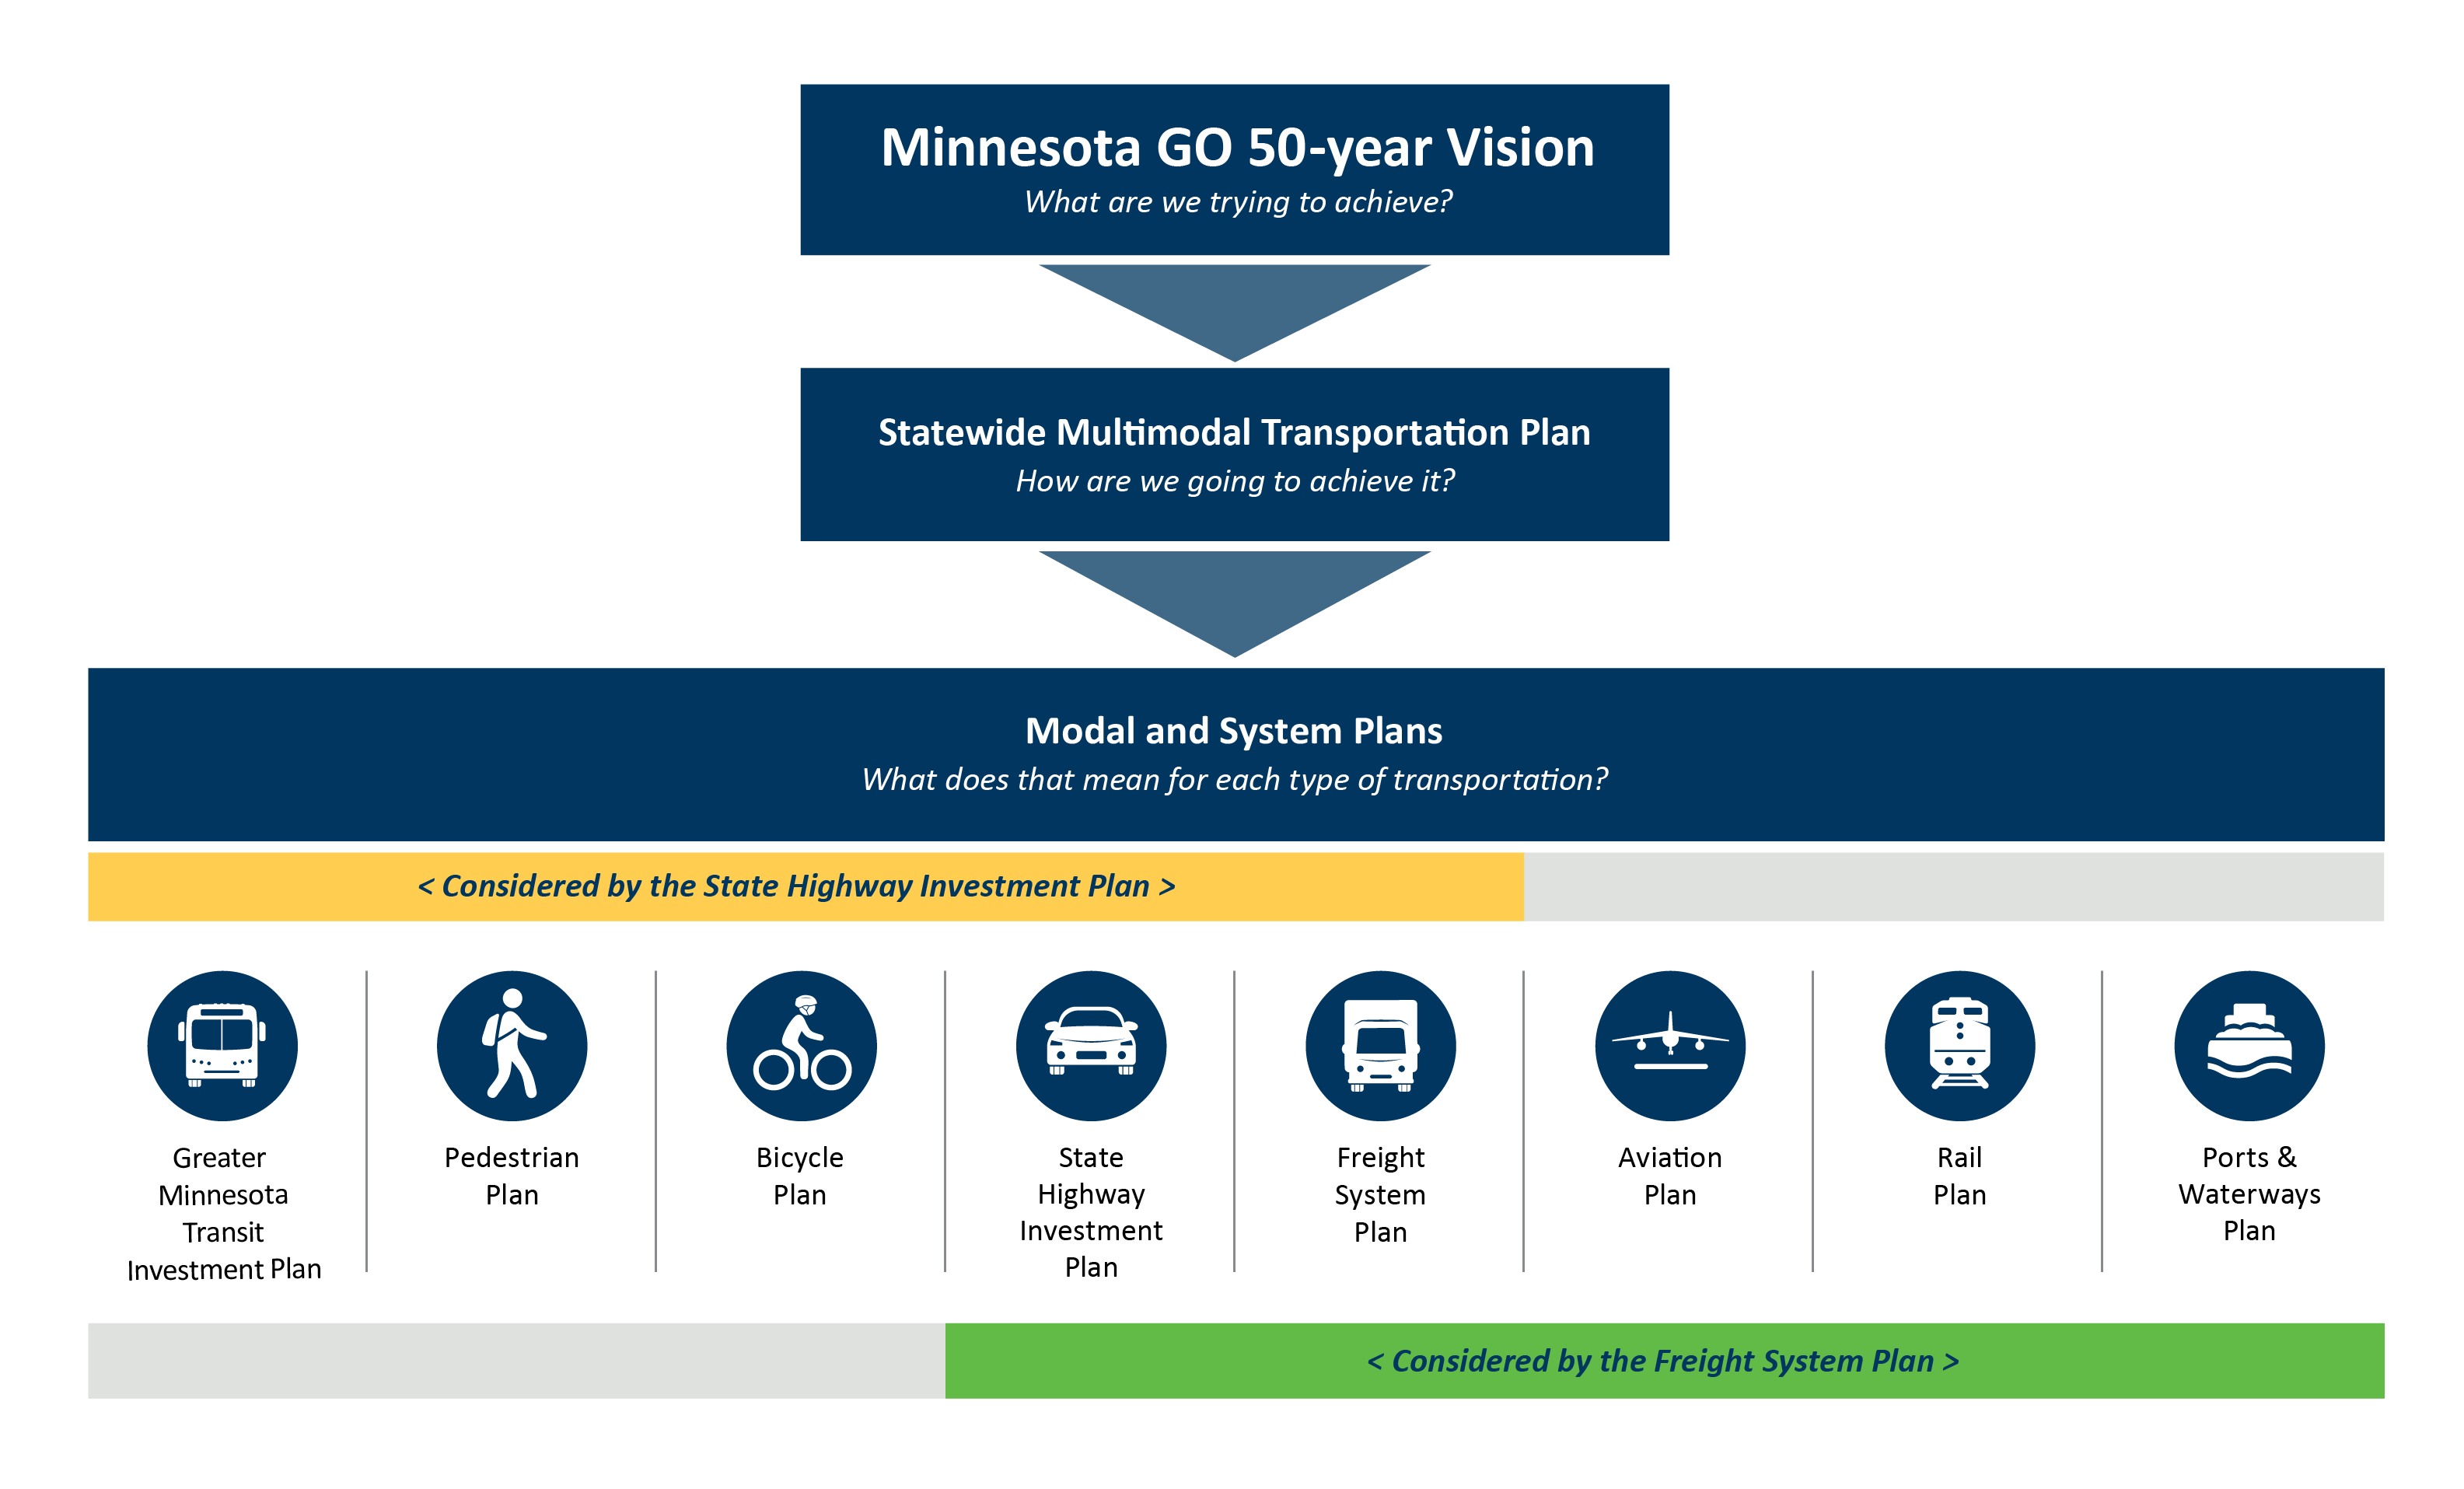 Flowchart of Minnesota GO 50-year vision's relationship to the Statewide Multimodal Transportation Plan and the Modal and System Plans. The Minnesota GO Vision asks 'What are we trying to achieve?' This directs the Statewide Multimodal Transportation Plan (SMTP), which asks 'How are we going to achieve it?' The SMTP then directs the modal and system plans that ask 'What does that mean for each type of transportation?' These modal and system plans include the Greater Minnesota Transit Investment Plan, Pedestrian Plan, Bicycle Plan, State Highway Investment Plan, Freight System Plan, Aviation Plan, Rail Plan, and Ports and Waterways Plan.